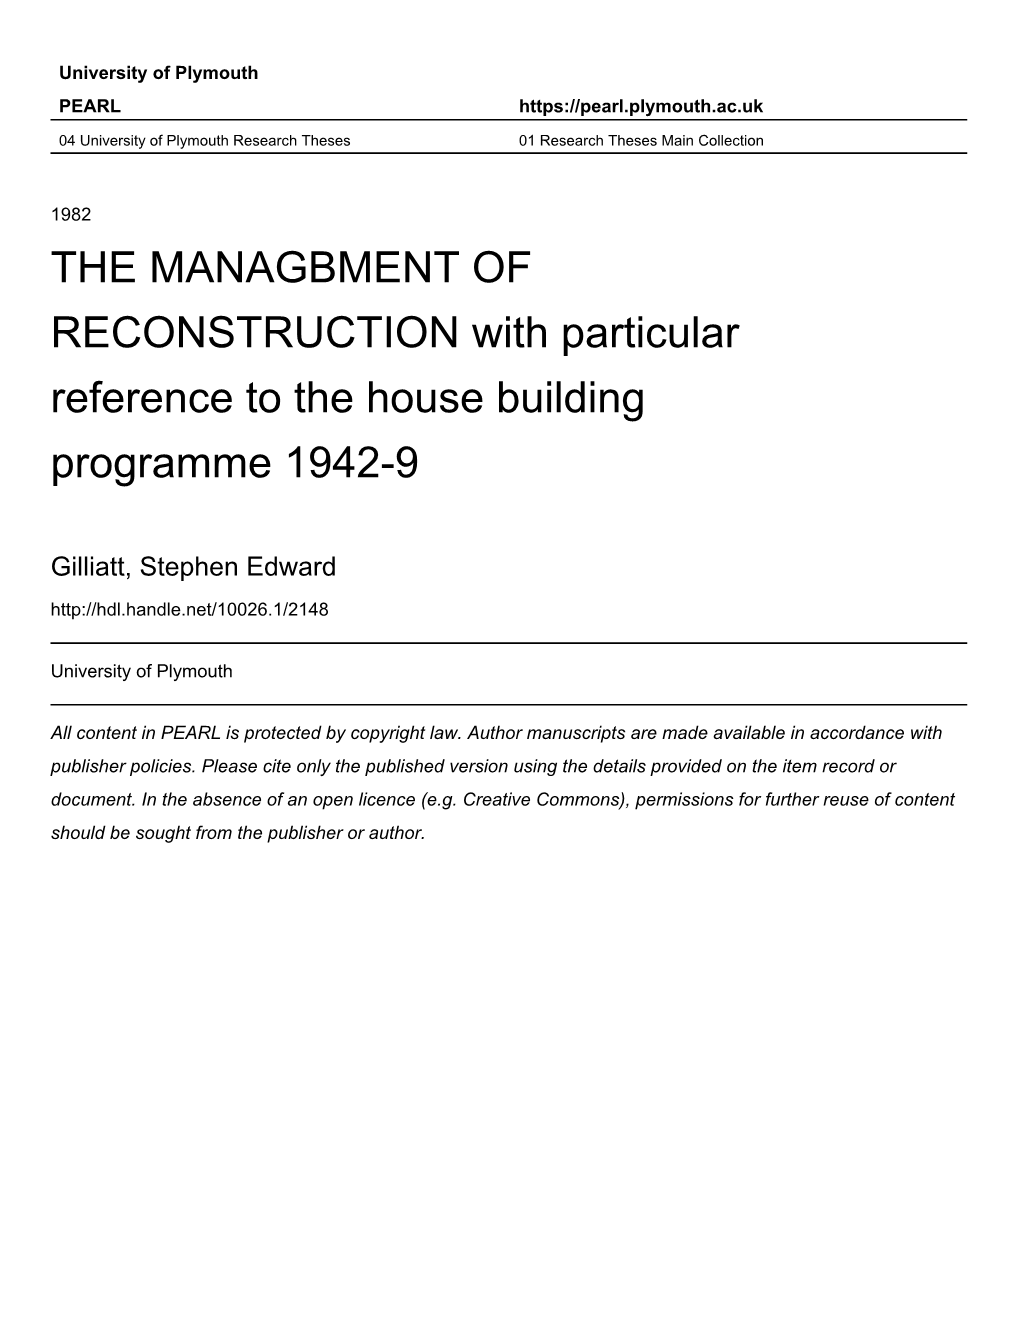 THE MANAGBMENT of RECONSTRUCTION with Particular Reference to the House Building Programme 1942-9